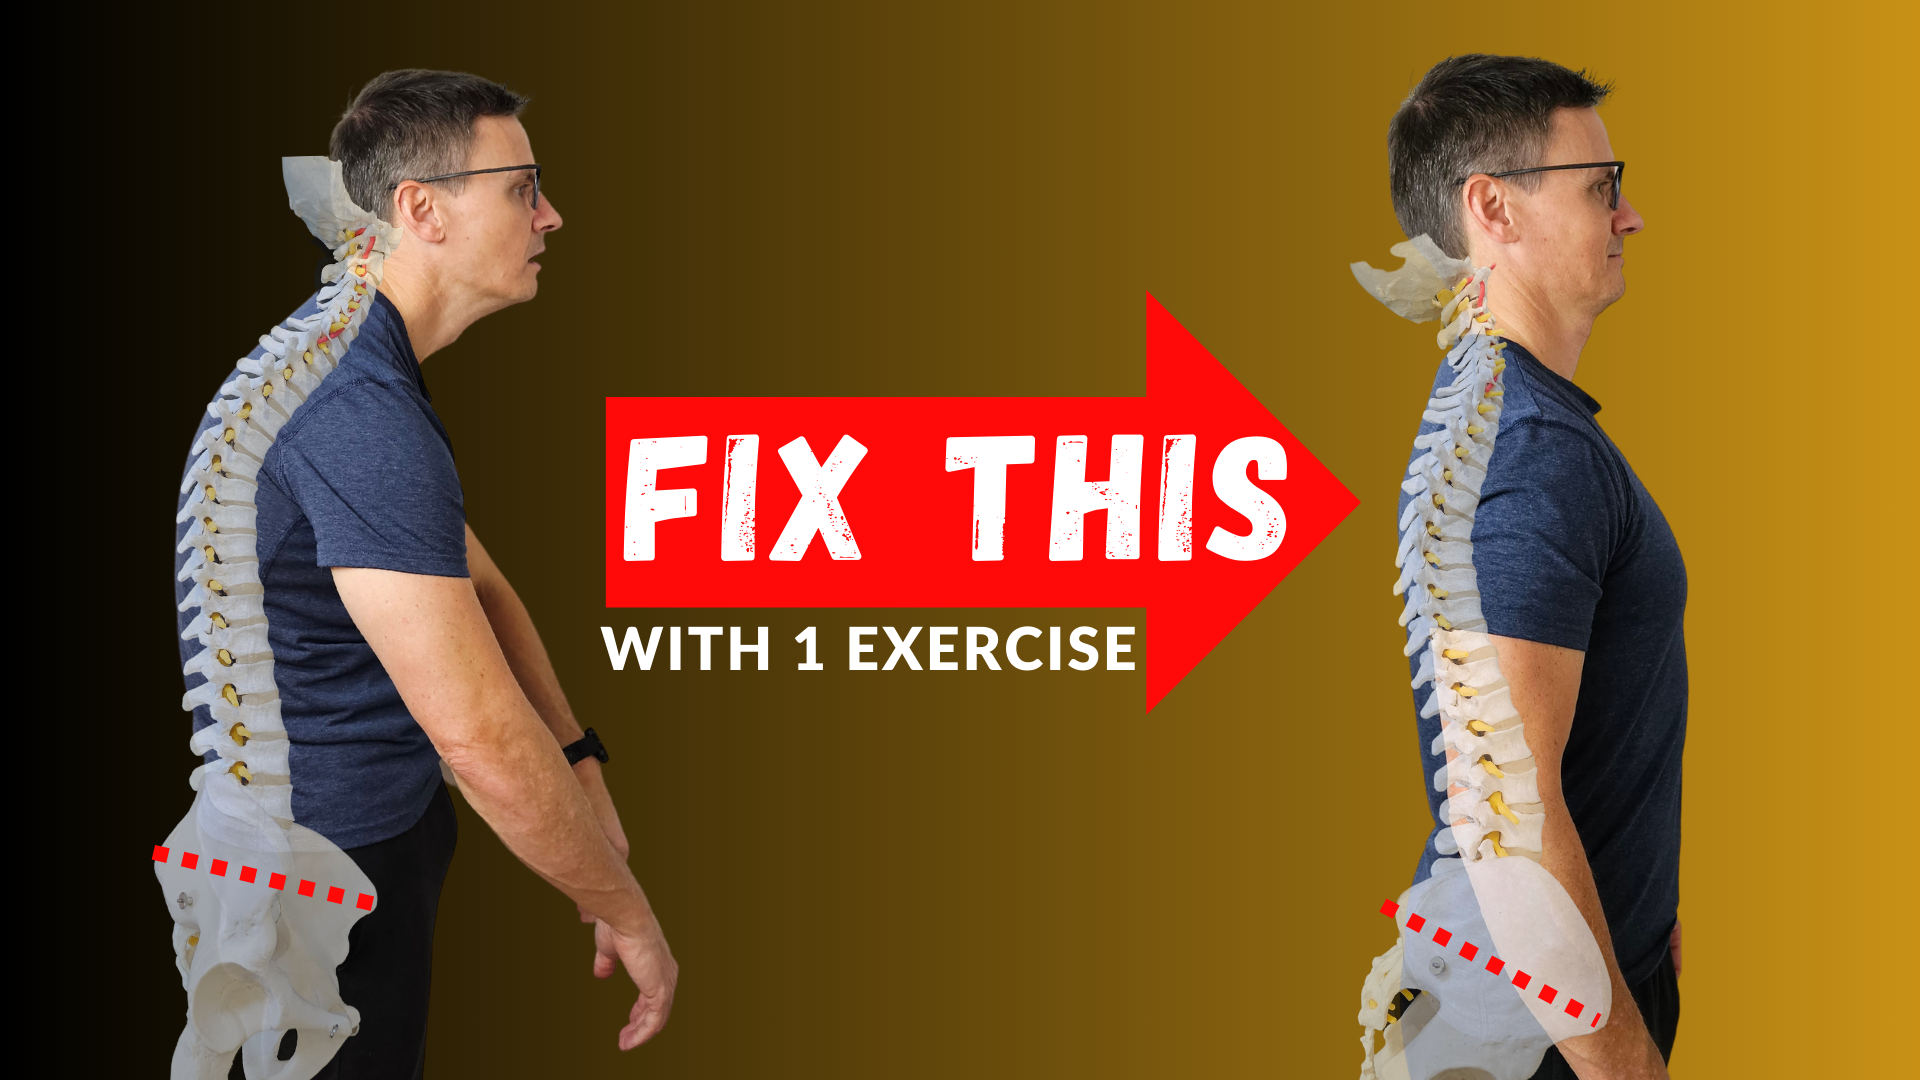 What Can You Do To Help Degenerative Disc Disease (DDD)? - Chiropractic on  Eagle, Dr. Jon Saunders